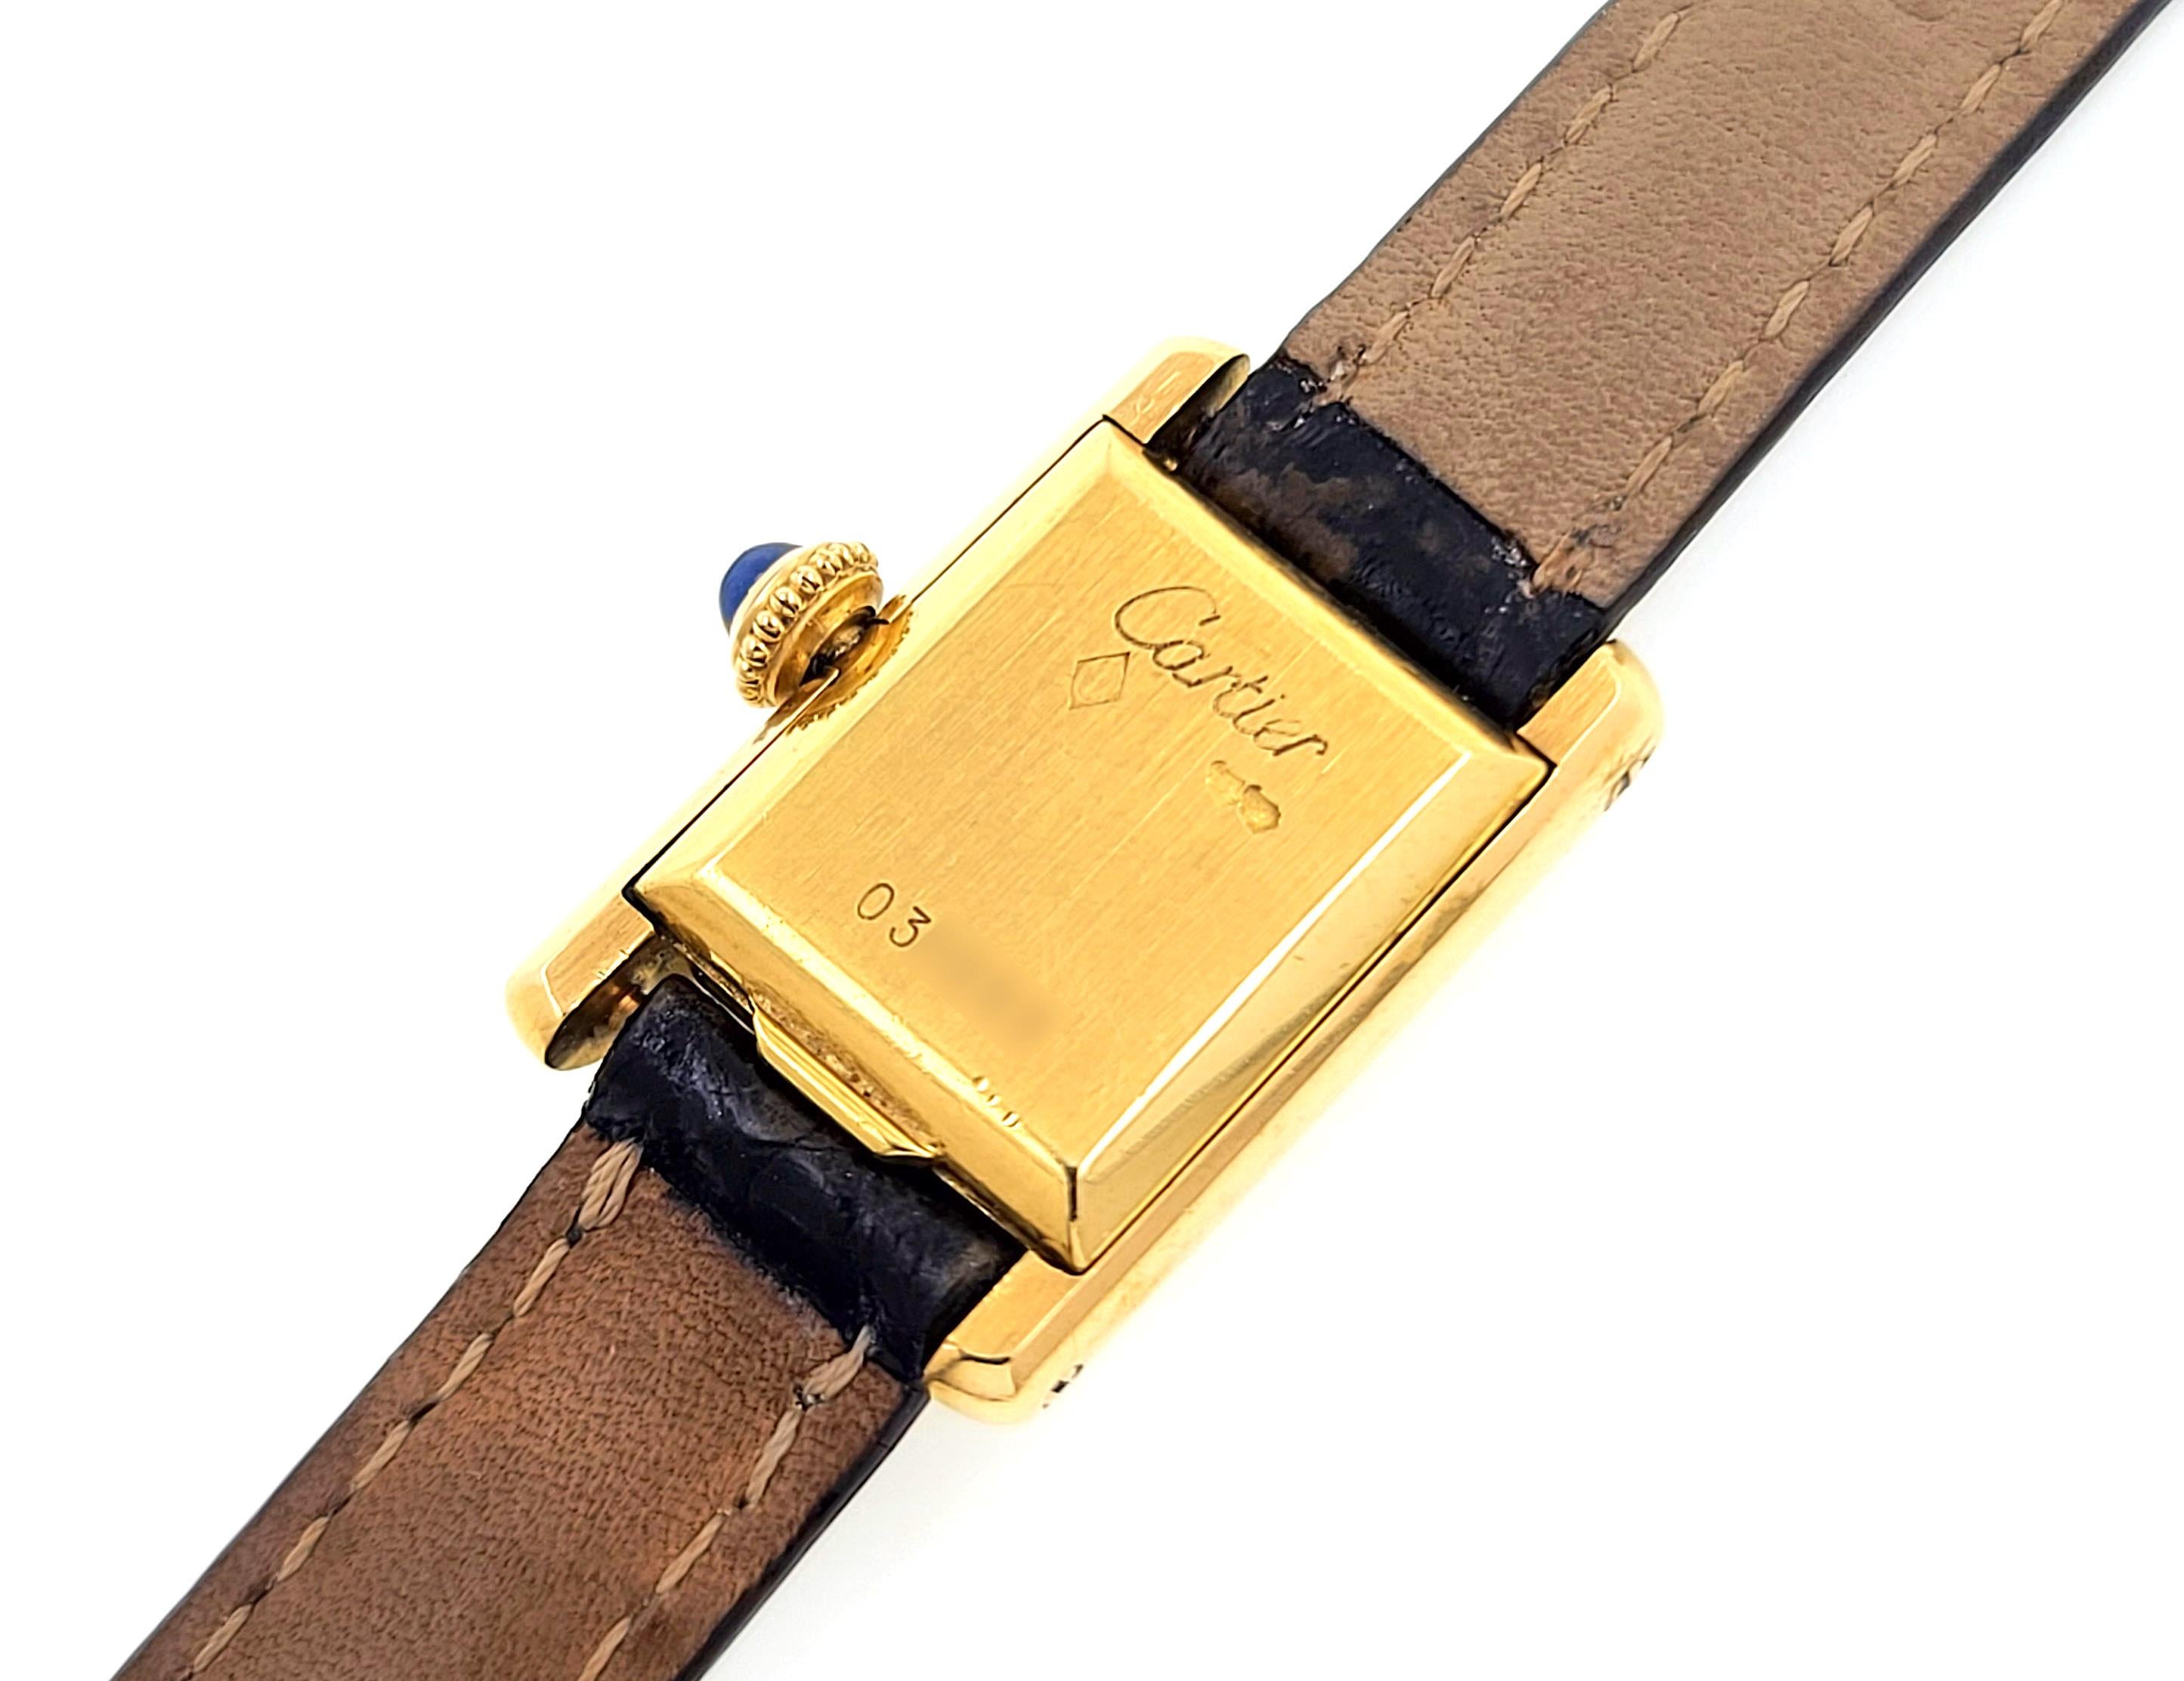 Cartier RARITY Mini Tank Allongée 1976 Ref 03 Jaeger LeCoultre 845 18k Gold In Excellent Condition For Sale In Neuilly-sur-Seine, IDF